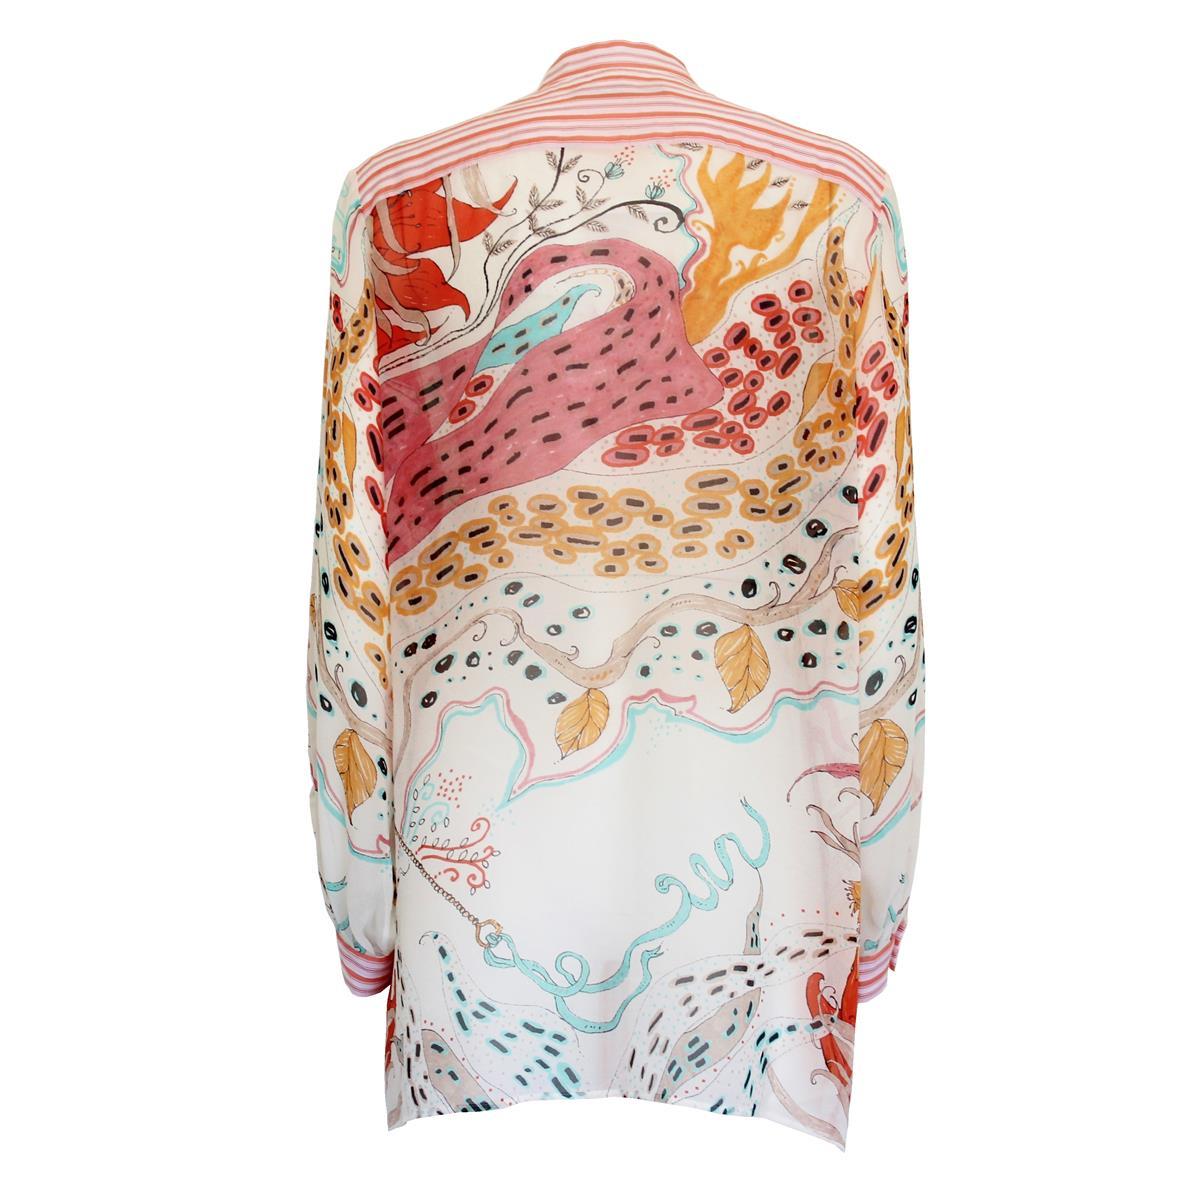 Beautiful Roberto Cavalli shirt
Silk
Fancy pattern
White and coral base
Ivory like boules
Over fit
Lenght from shoulder cm 75 (29.5 inches)
Shoulders cm 42 (16.5 inches)
Worldwide express shipping included in the price !